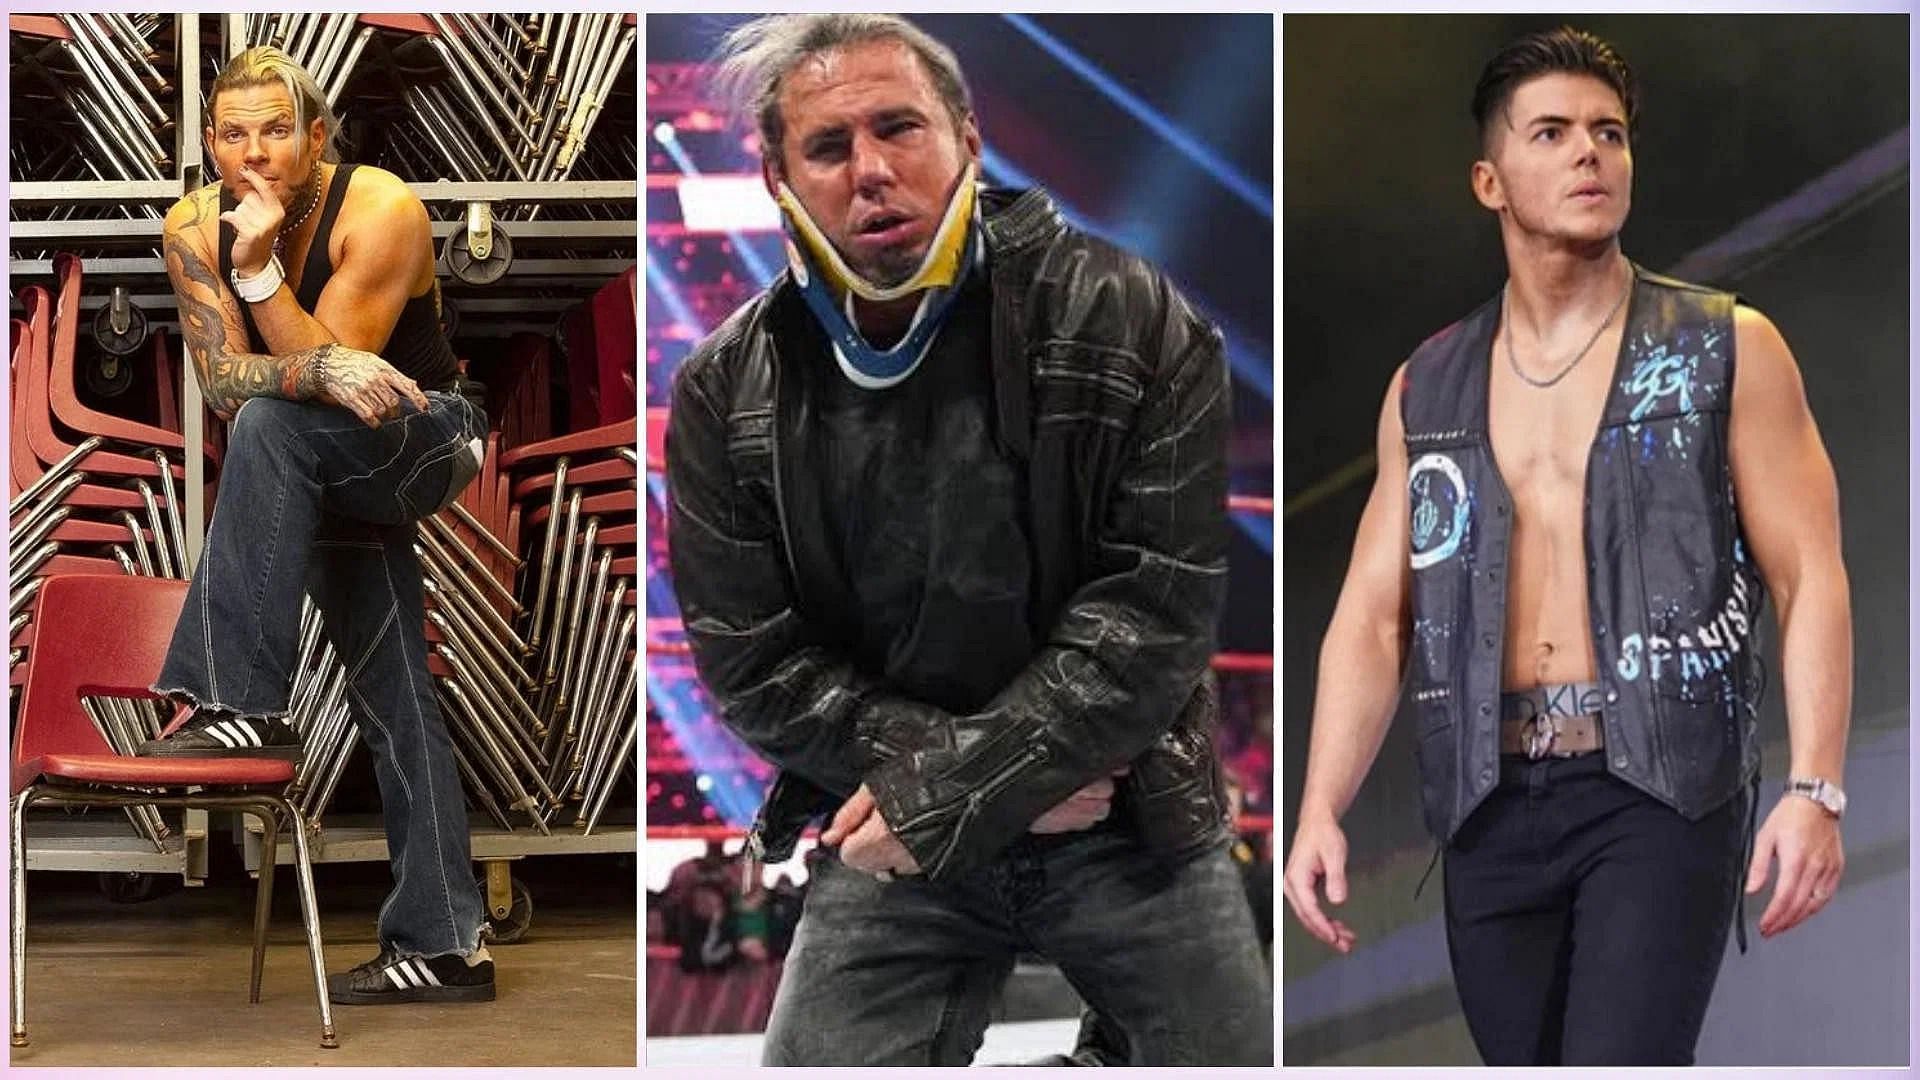 Images via WWE and AEW